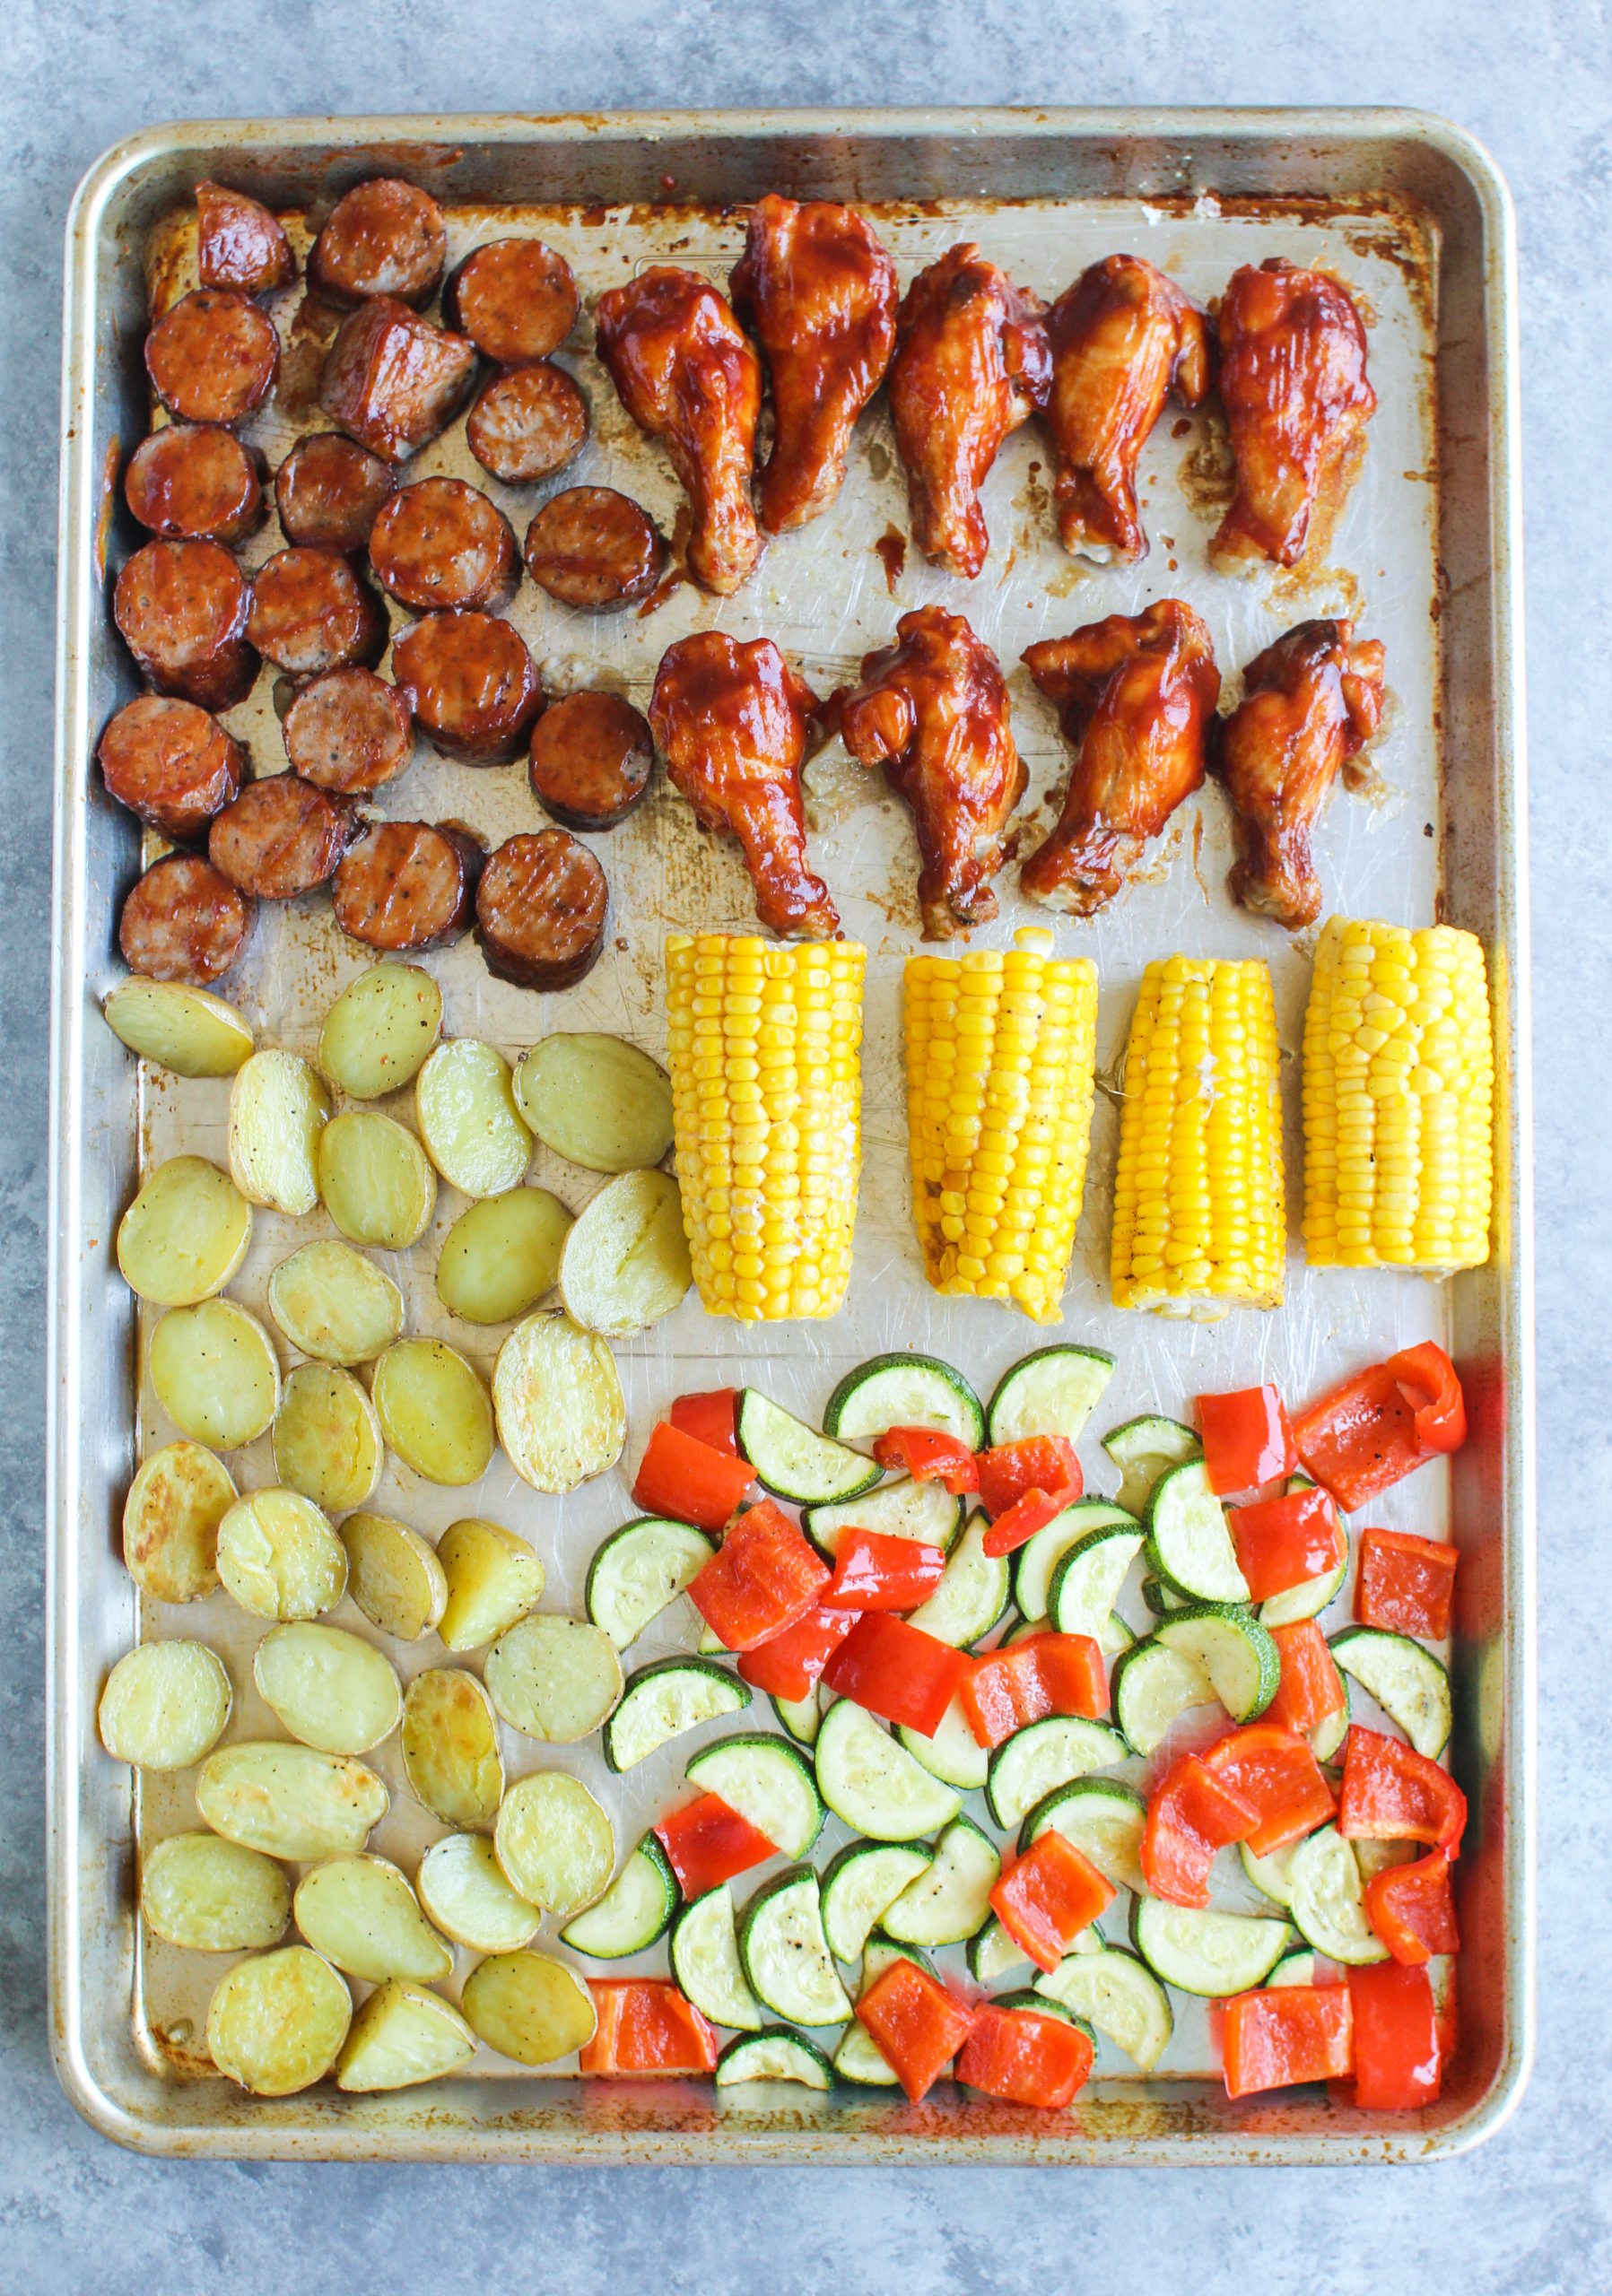 BBQ Sheet Pan Chicken & Sausage with Roasted Corn and Veggies